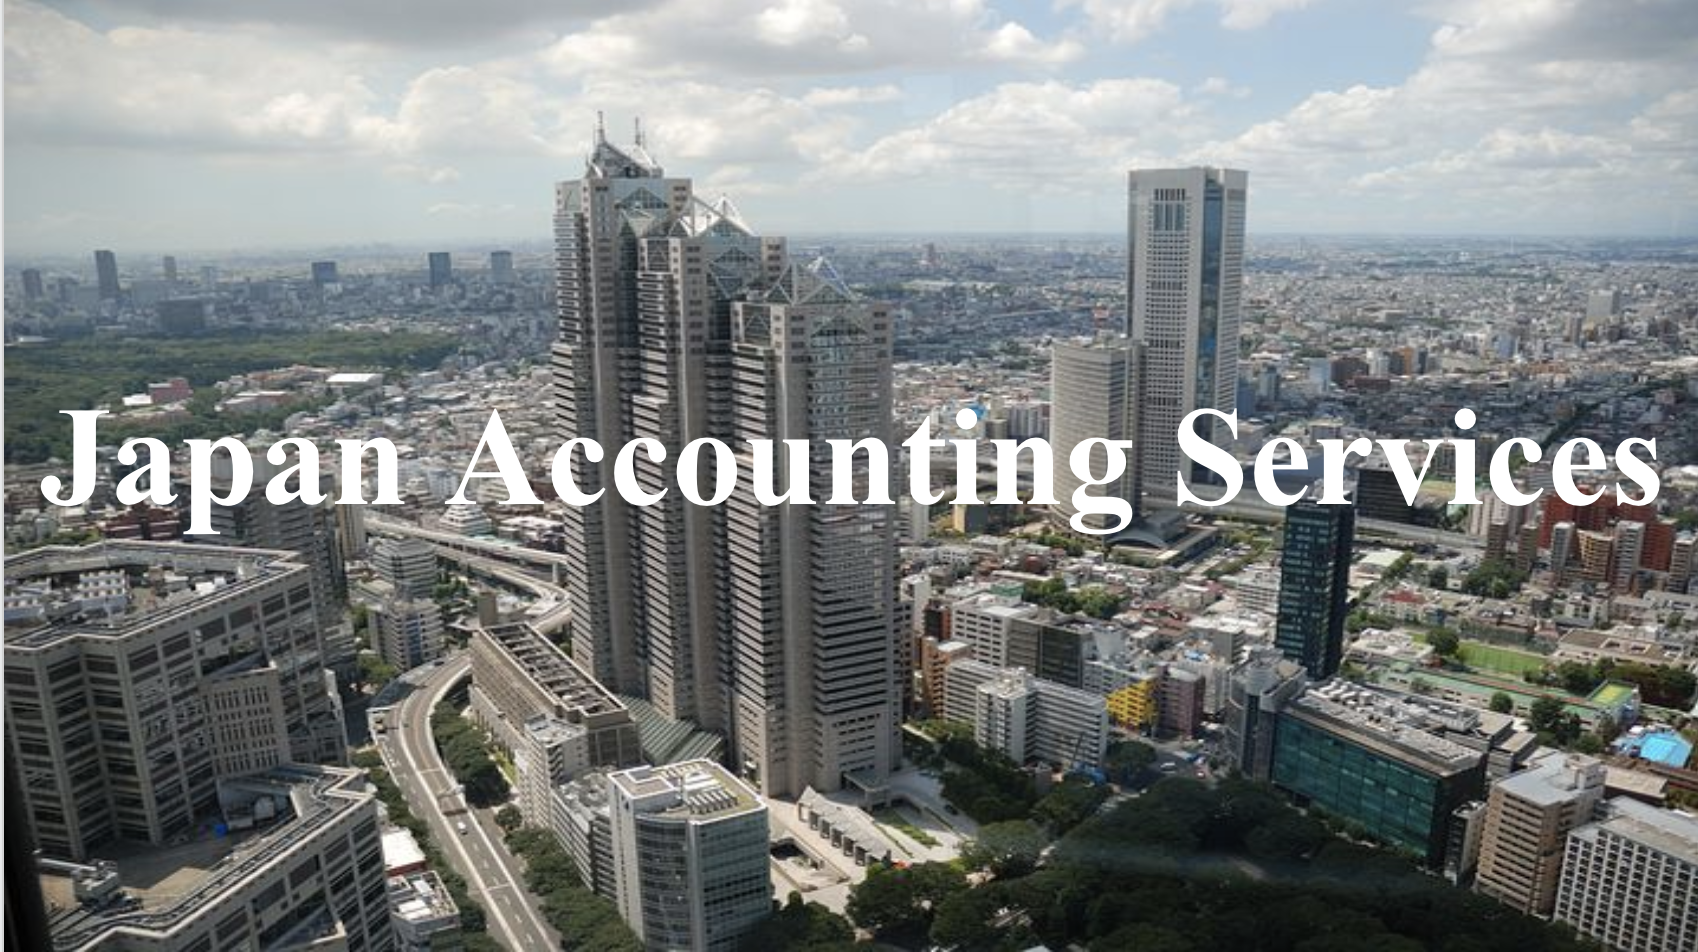 Japan Accounting Services